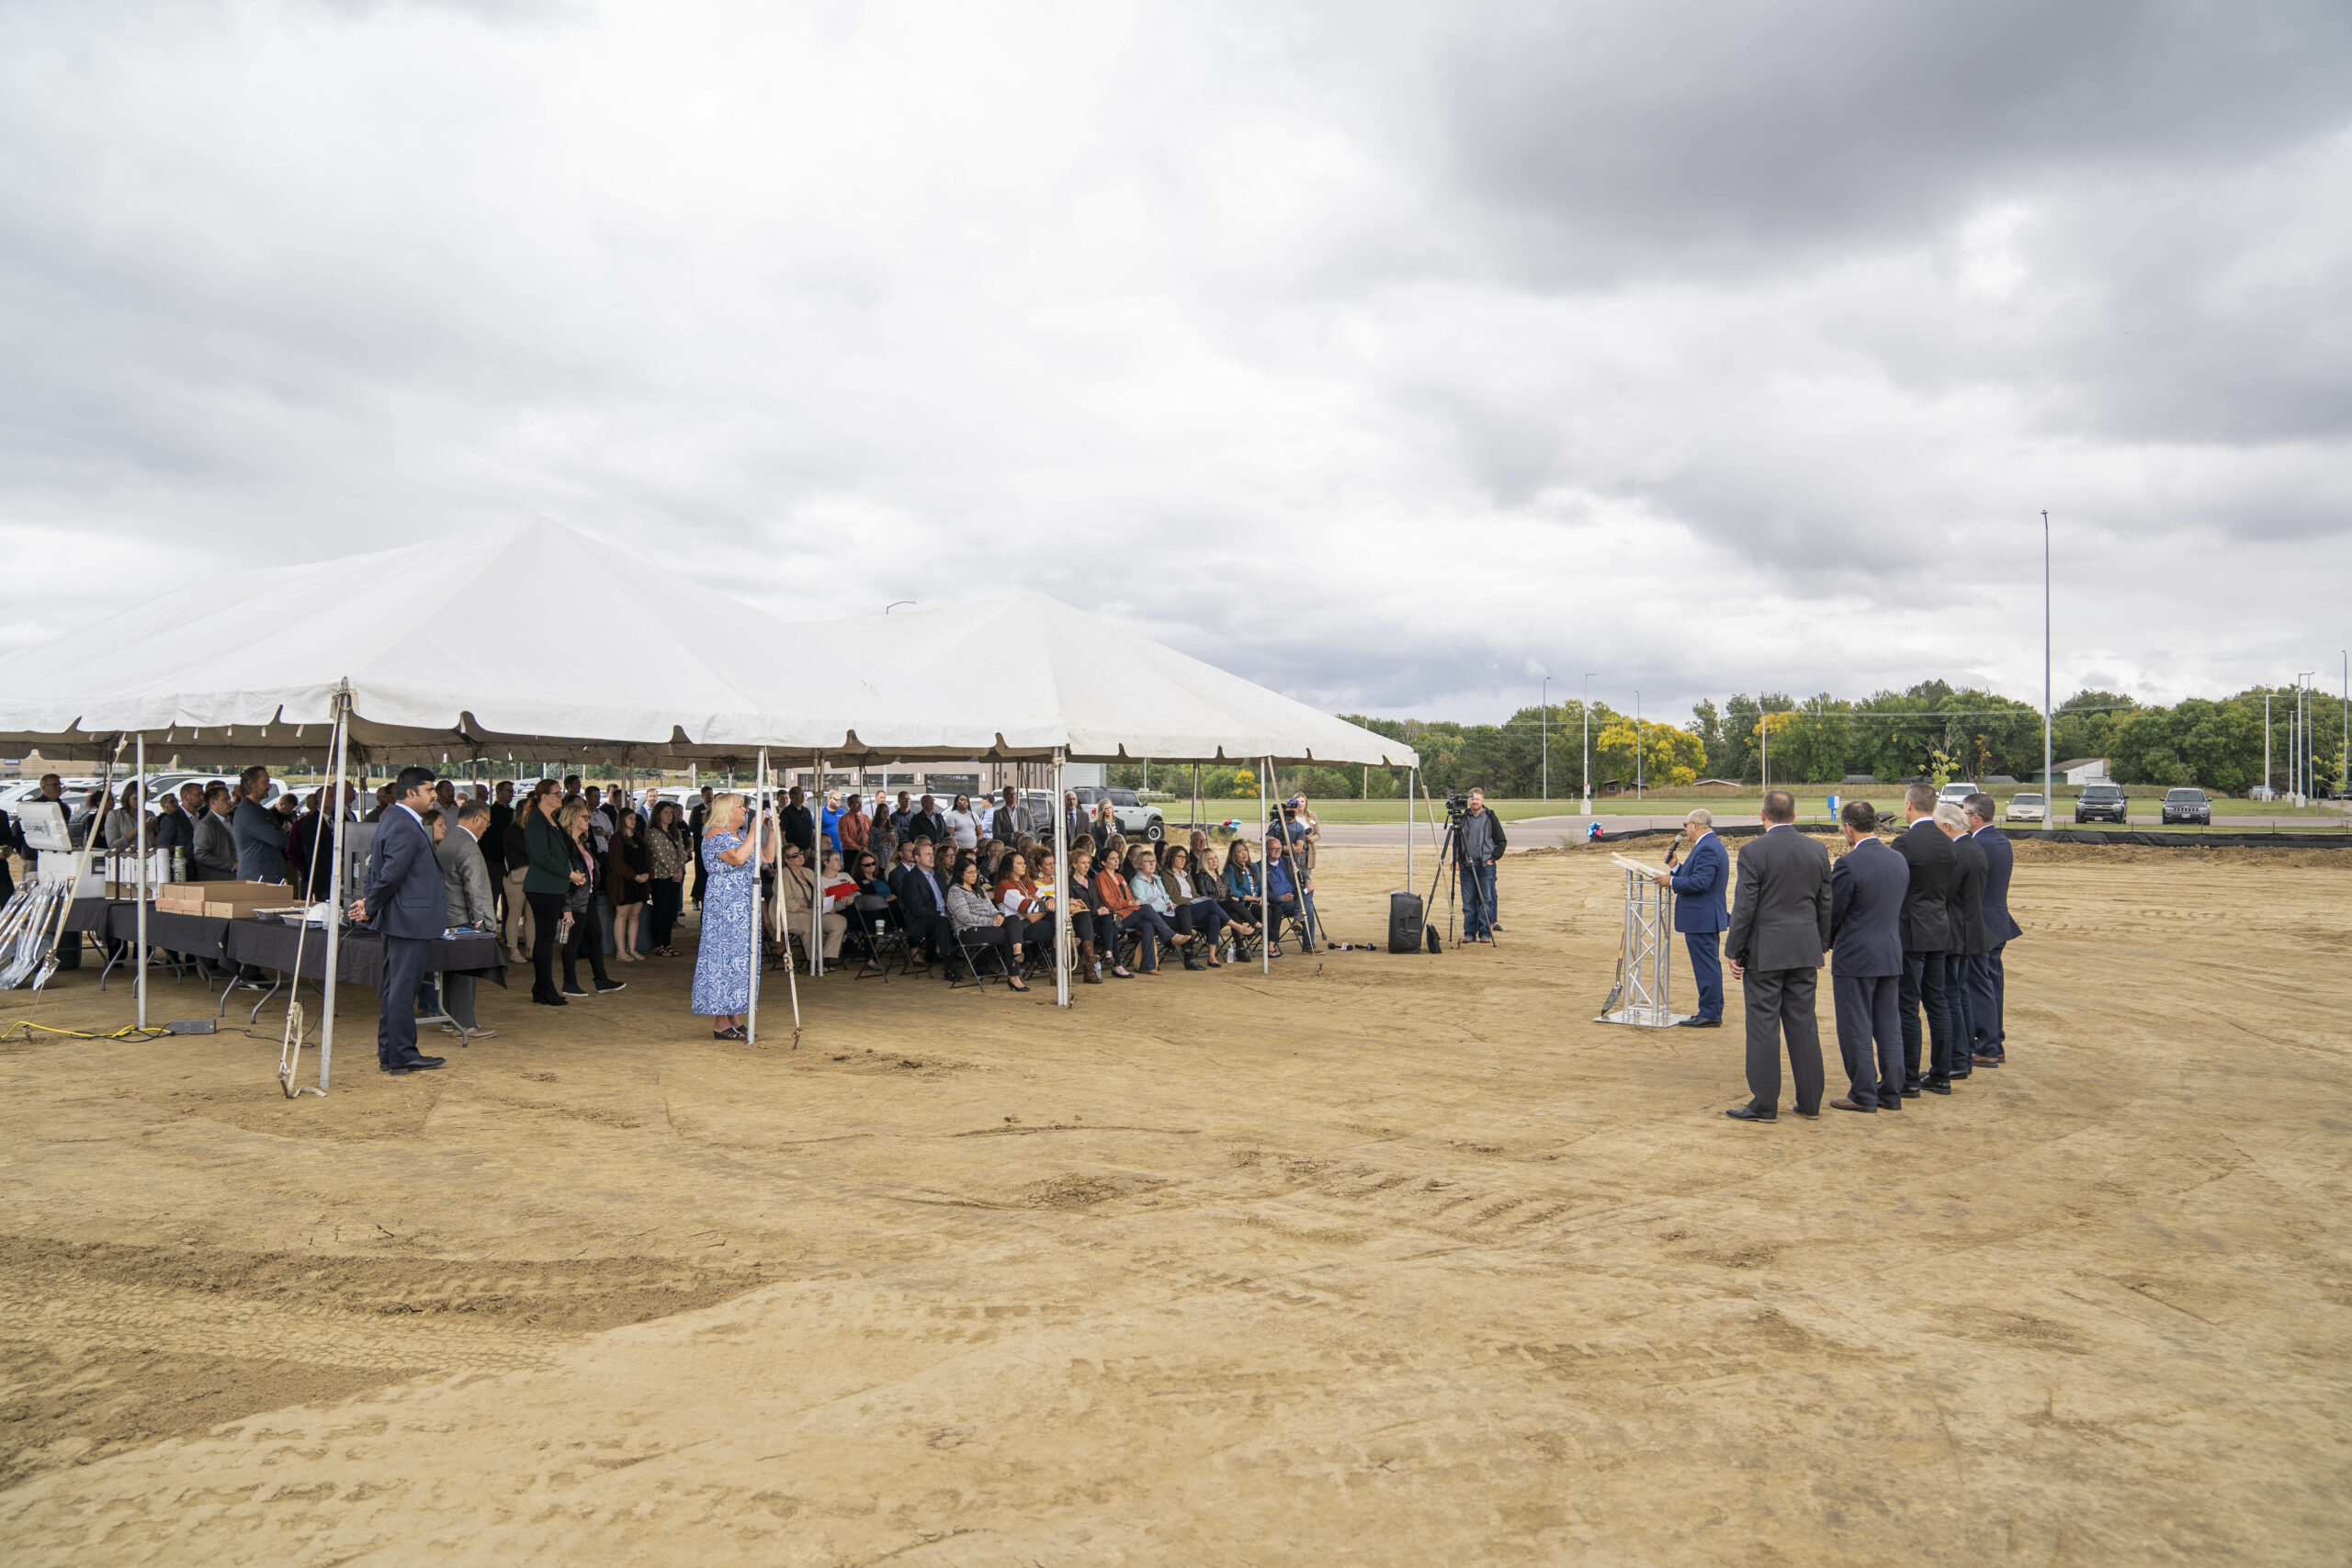 hundreds of people attend the ground breaking ceremony of the Sioux Falls One Stop